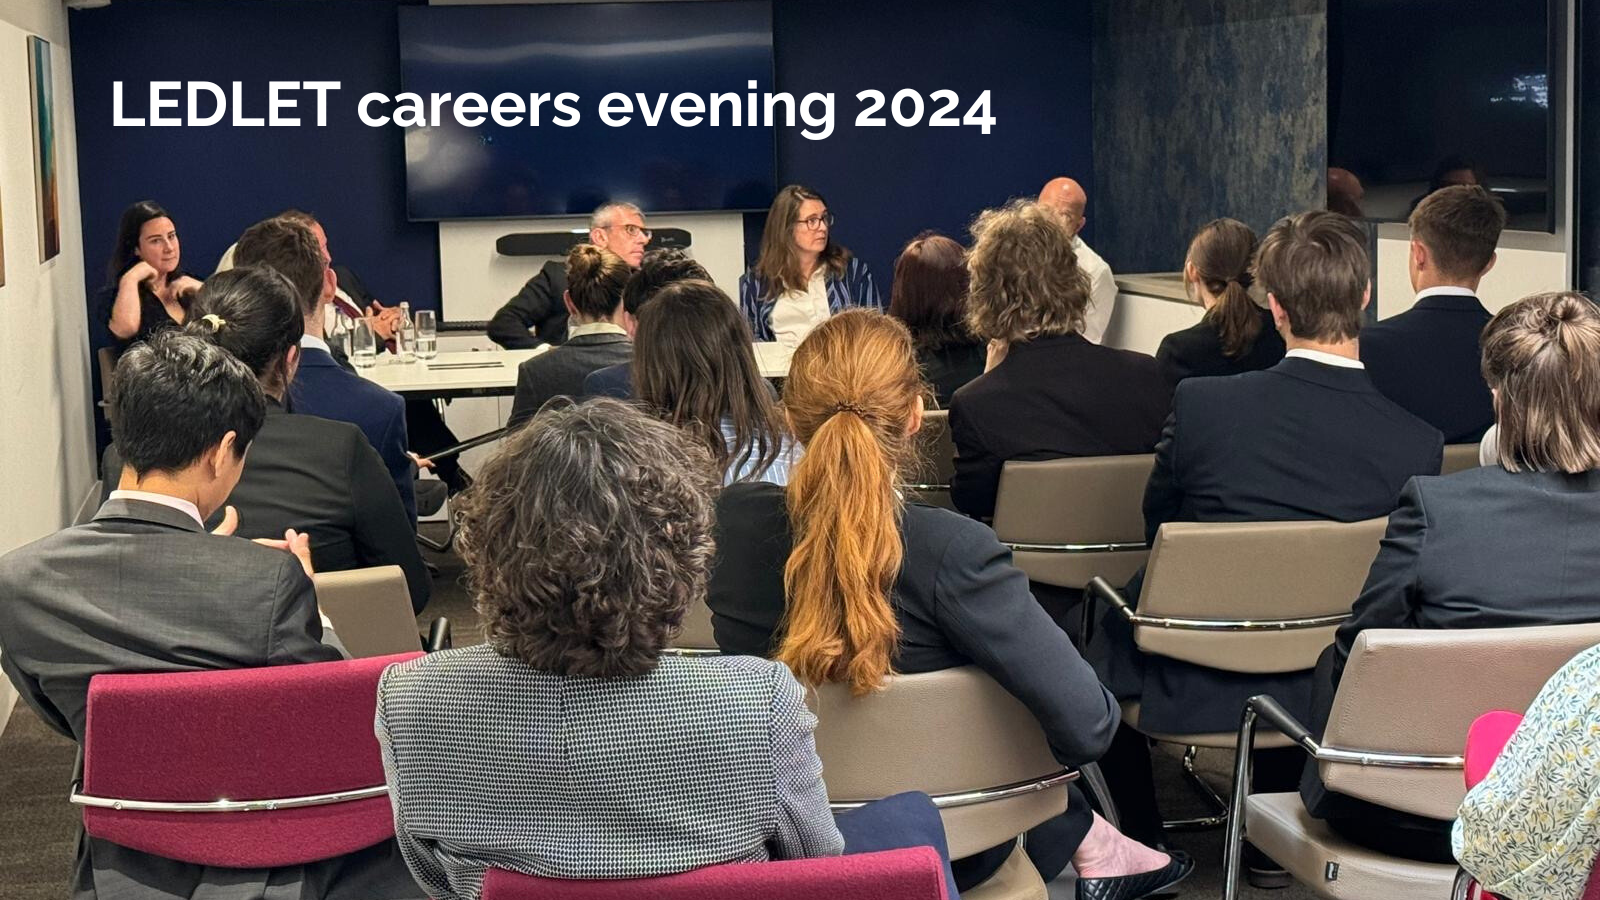 29 Bedford Row supports careers evening for under represented students